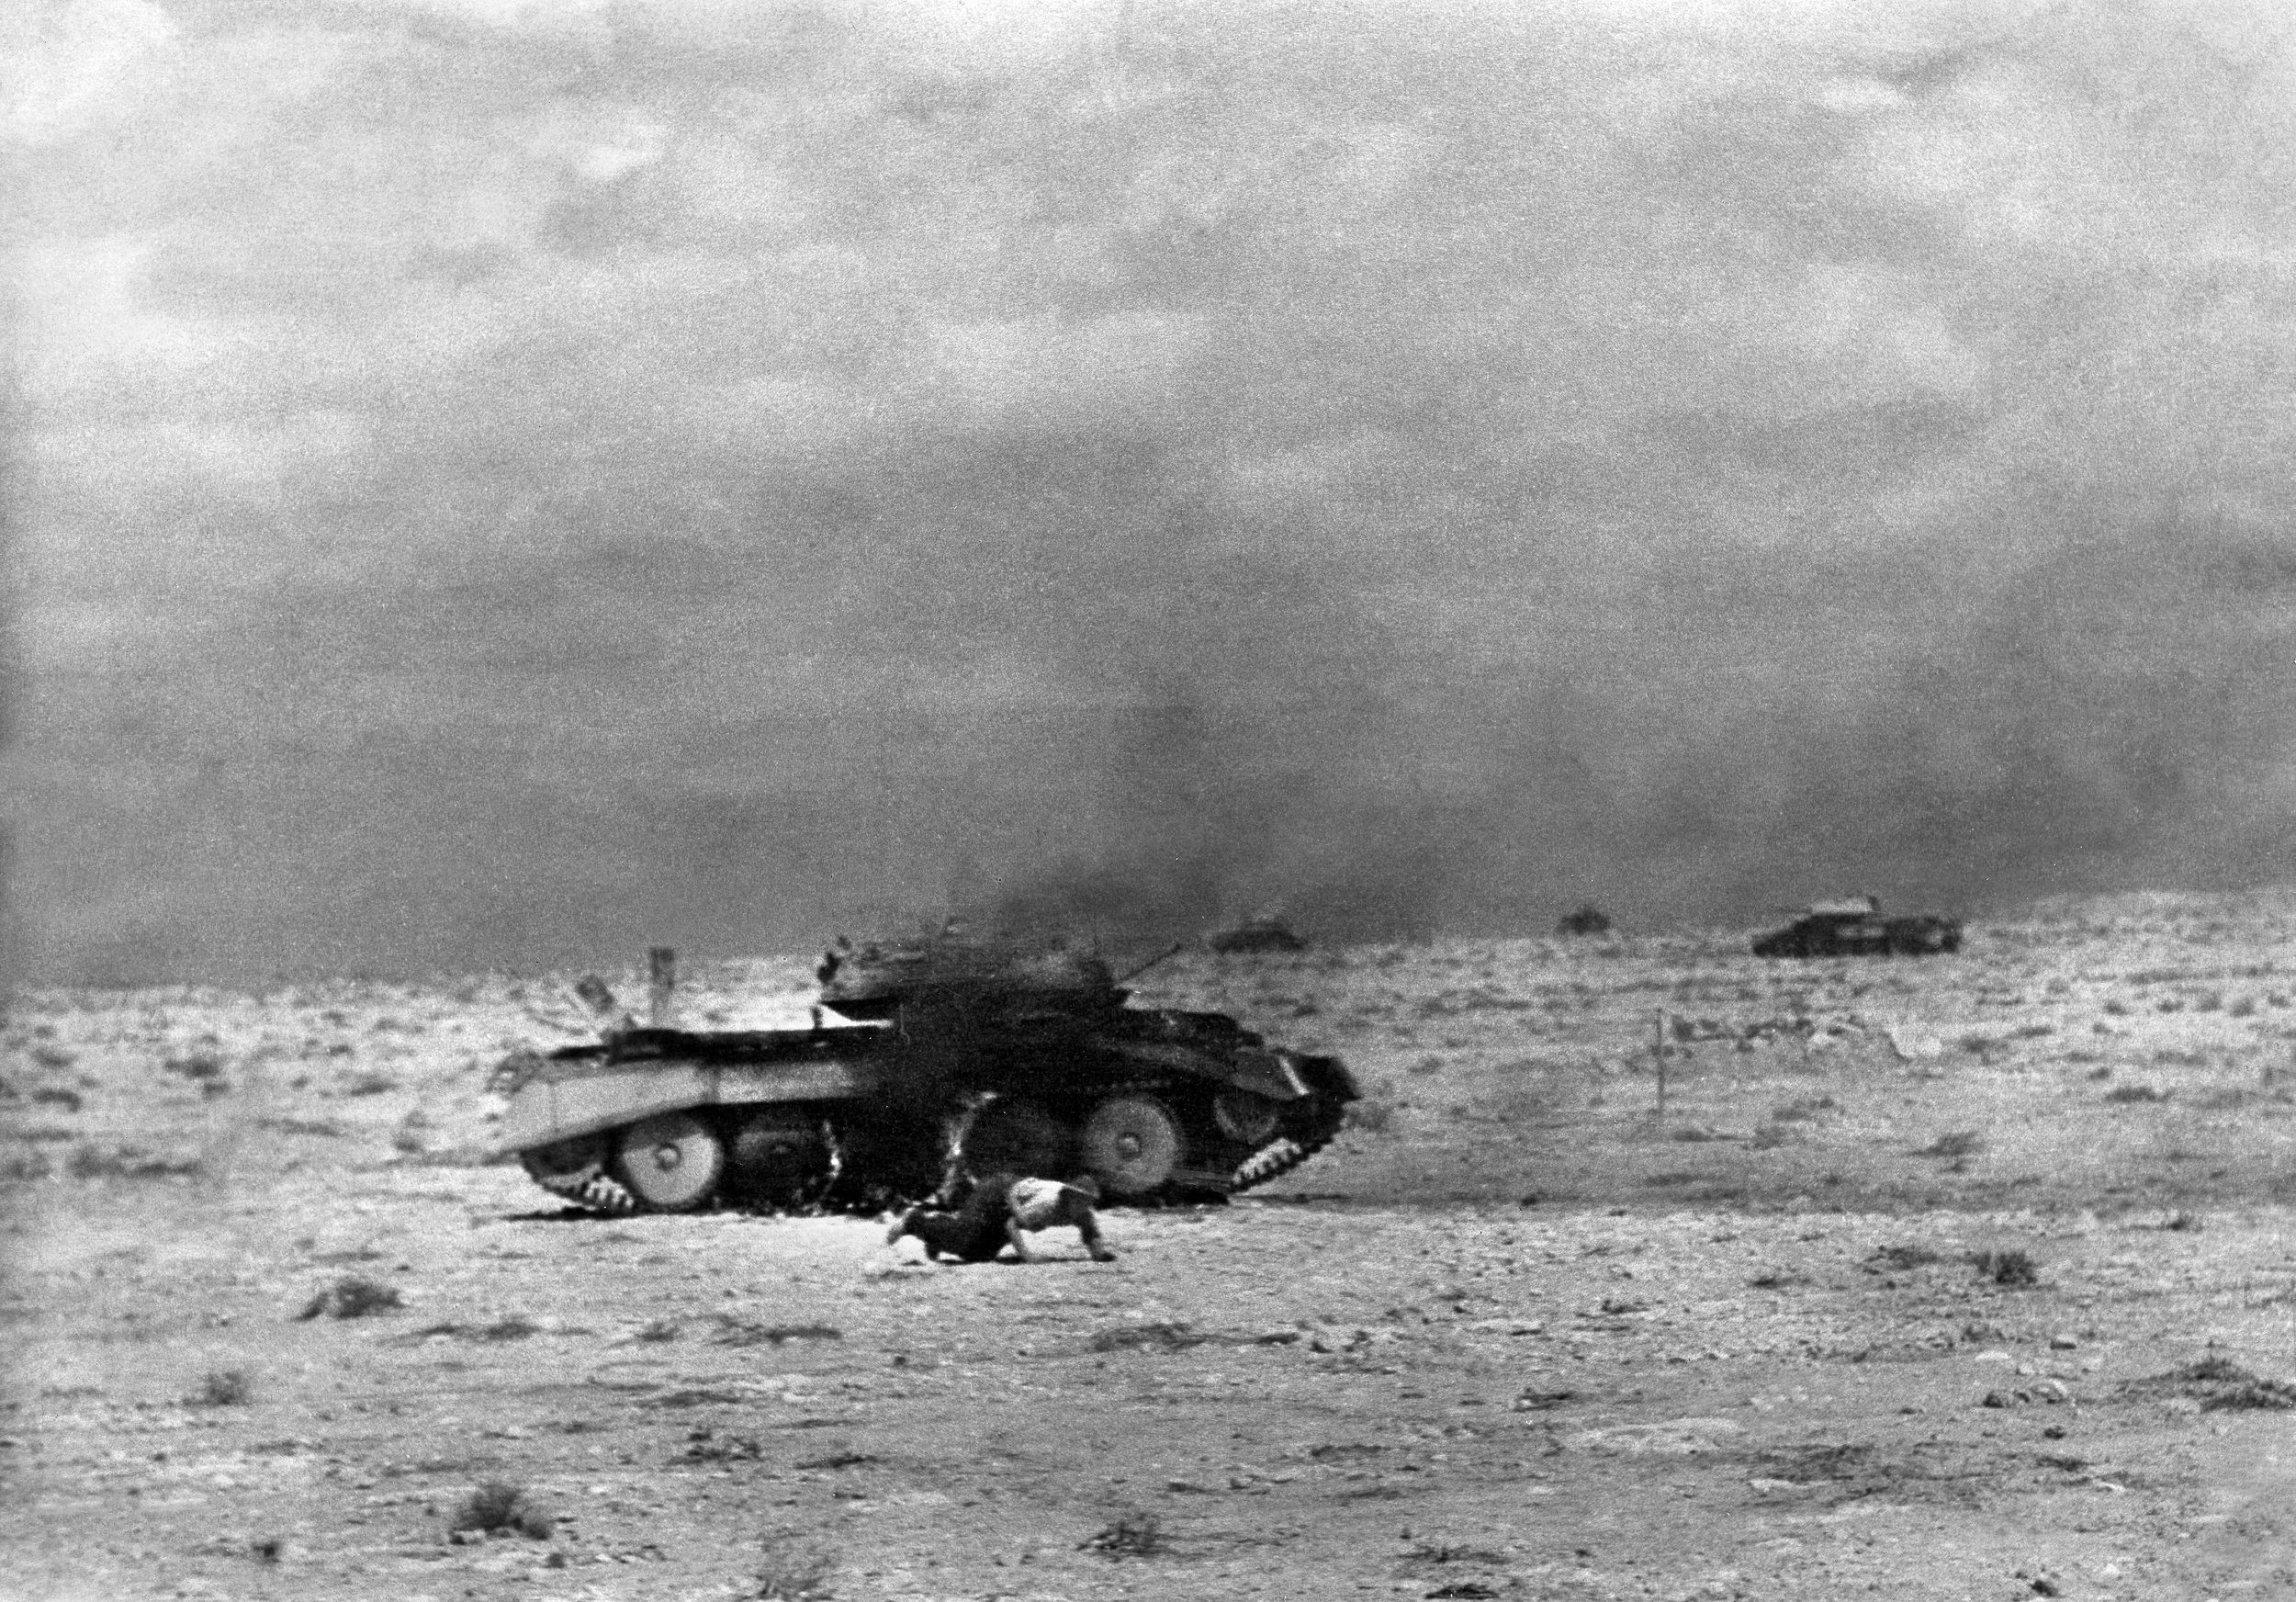  A British Crusader tank burns following a direct hit, as an injured crew member crawls away. Though more manueverable, the Crusader was under-armed and its light armor was no match for the Panzer III and Panzer IV medium tanks it faced in combat. Plagued by mechanical problems, it would not see combat after North Africa, where it was replaced as the main tank by  the M3 Grant and then by the M4 Sherman medium tanks, both supplied by the U.S. 